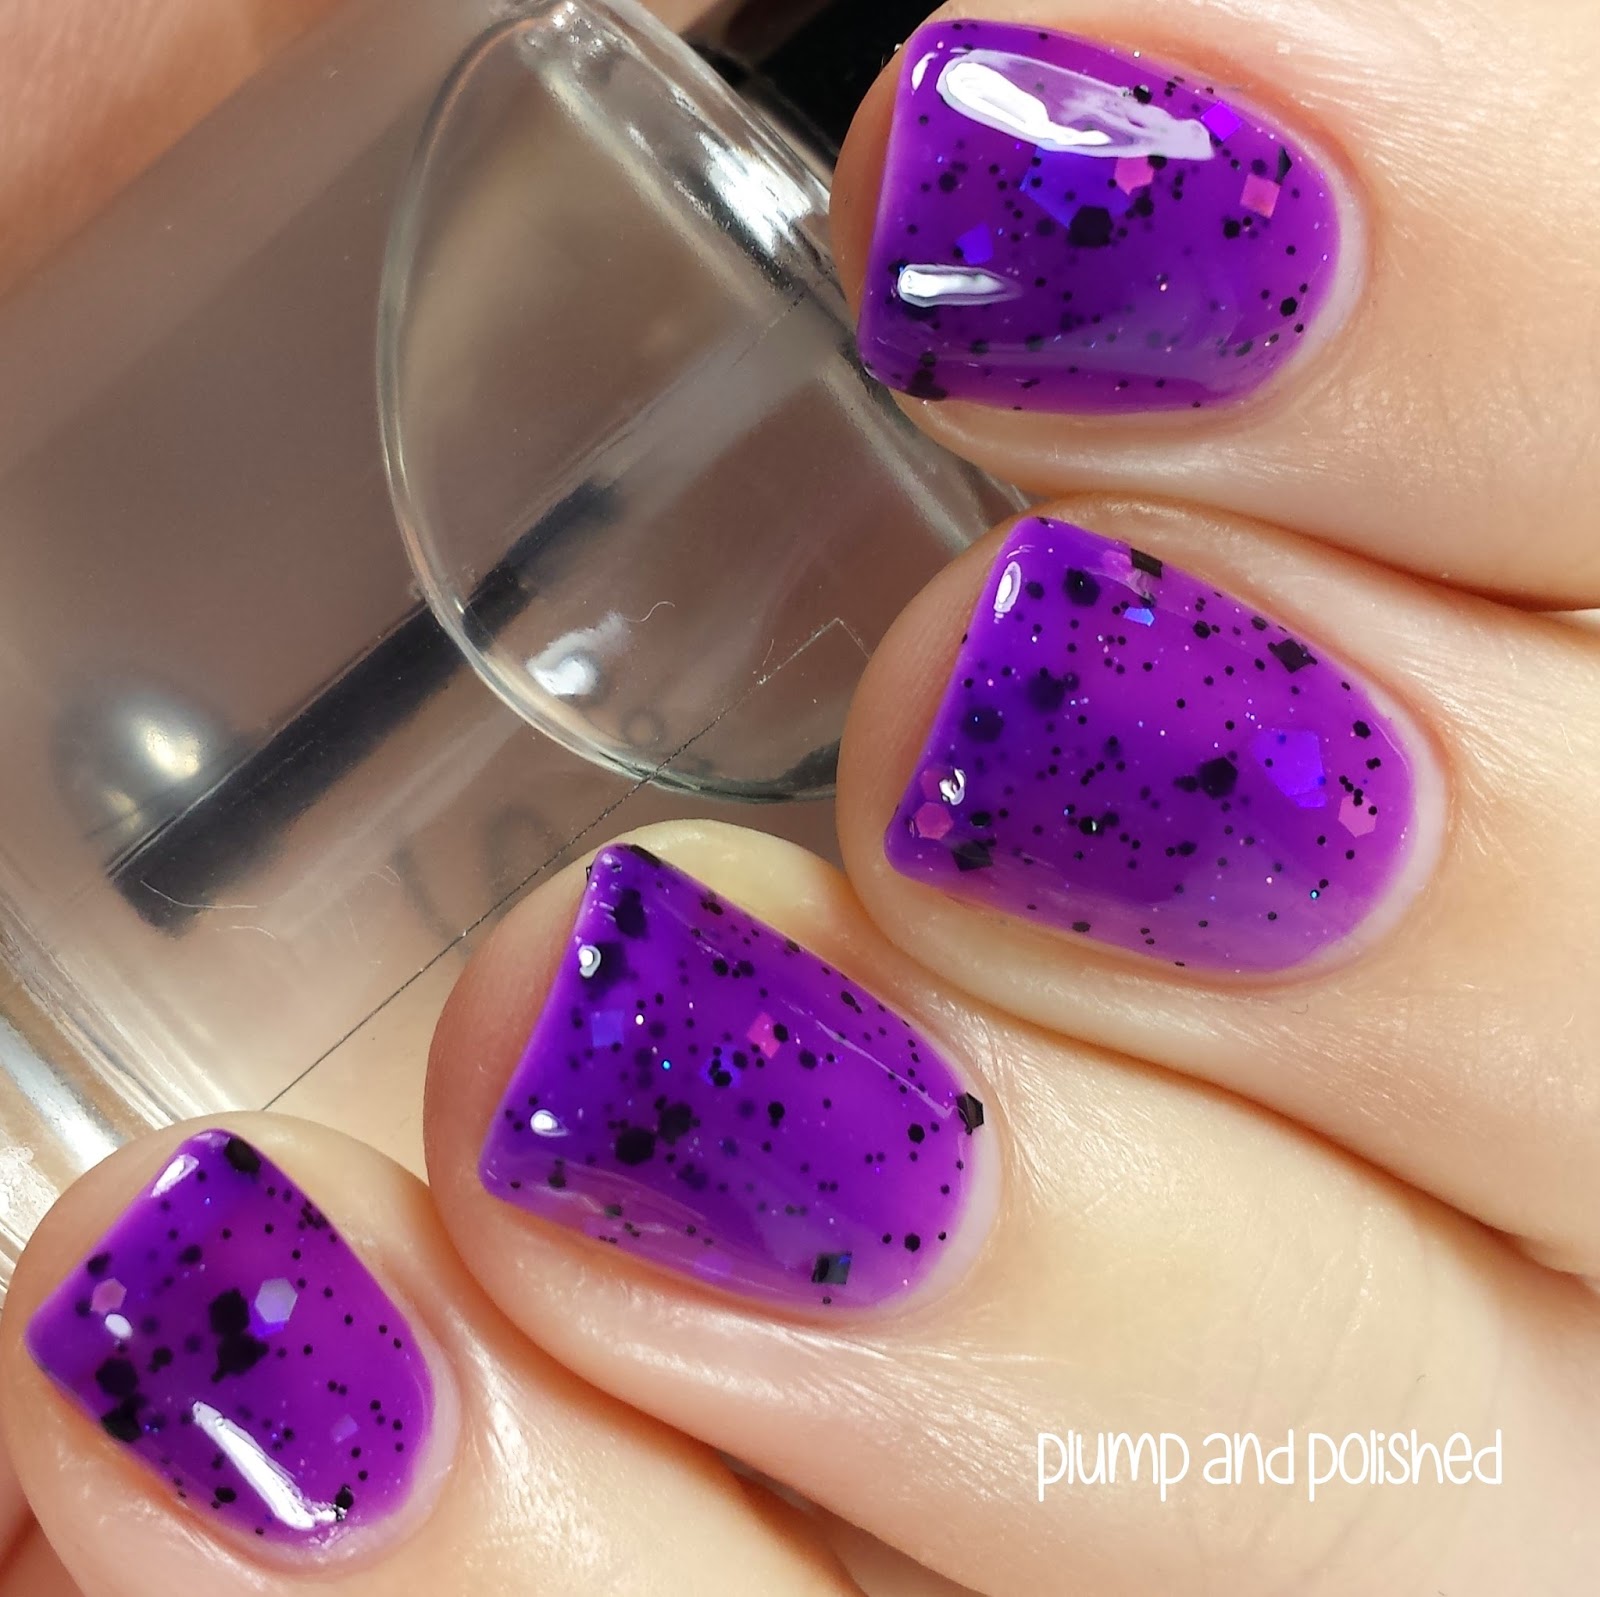 Plump and Polished: Forever Polished - Mythical Party Collection